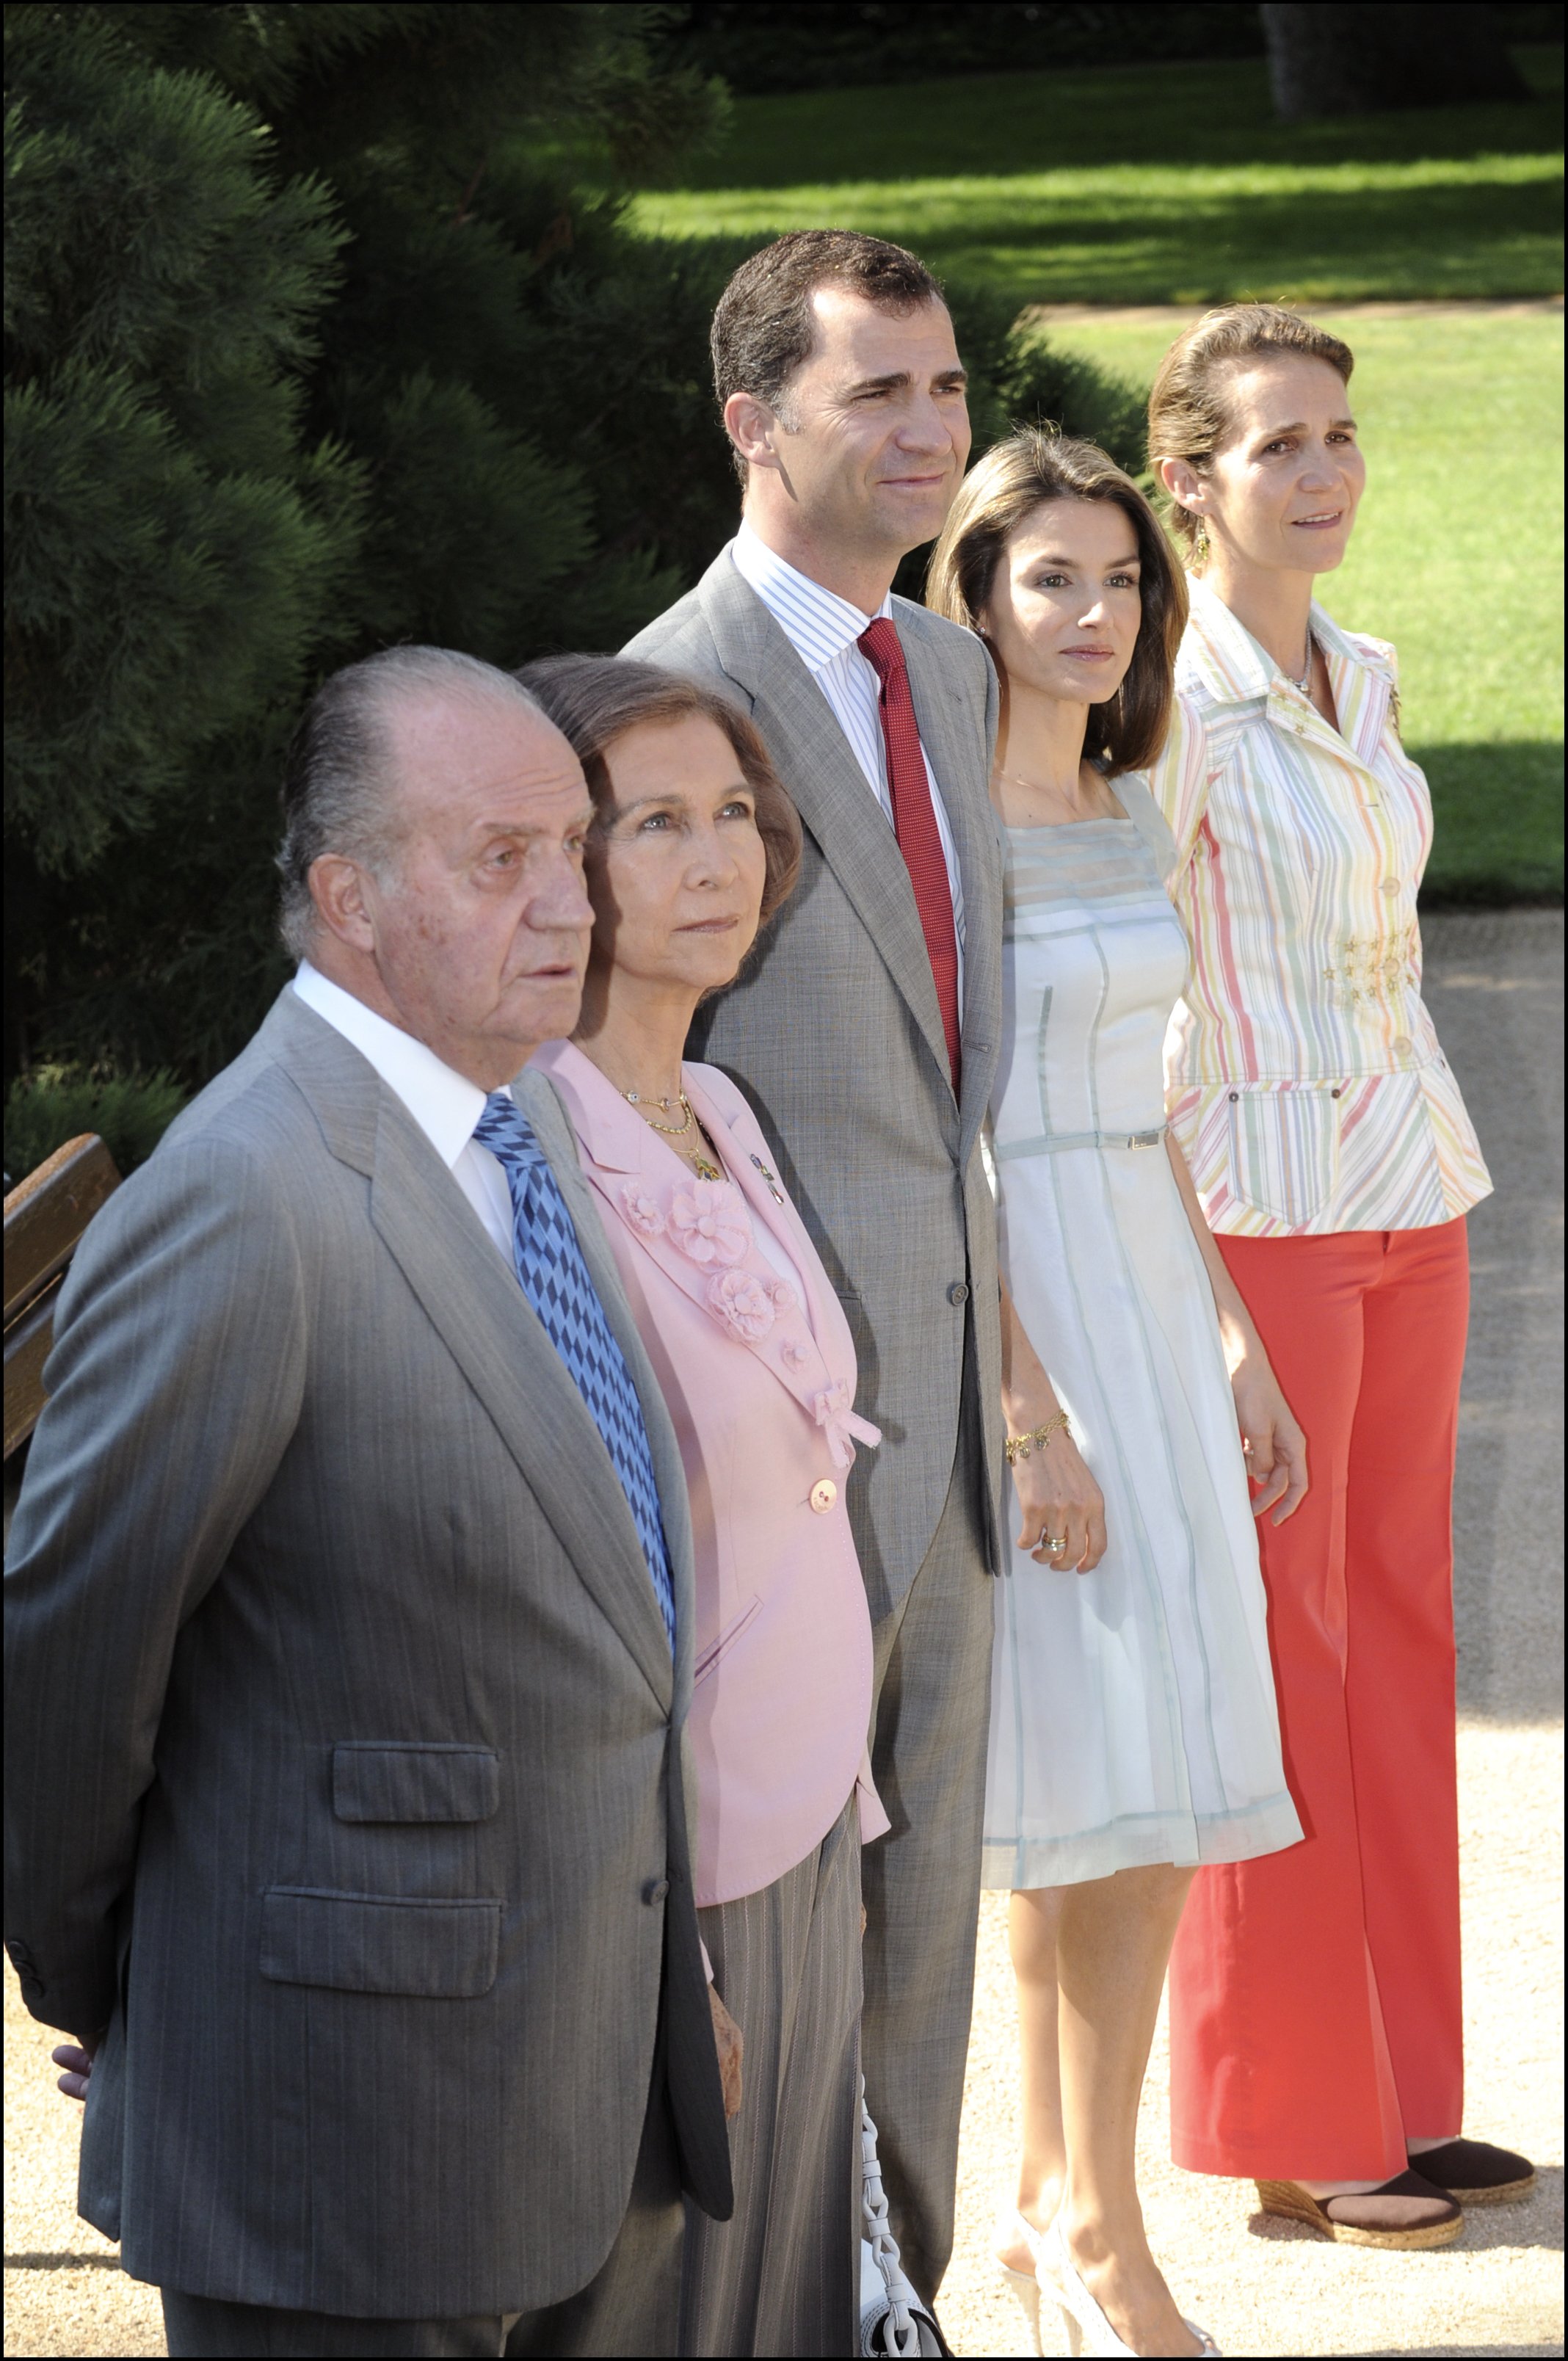 'The New York Times': Spanish monarchy's future questioned in Mallorca too